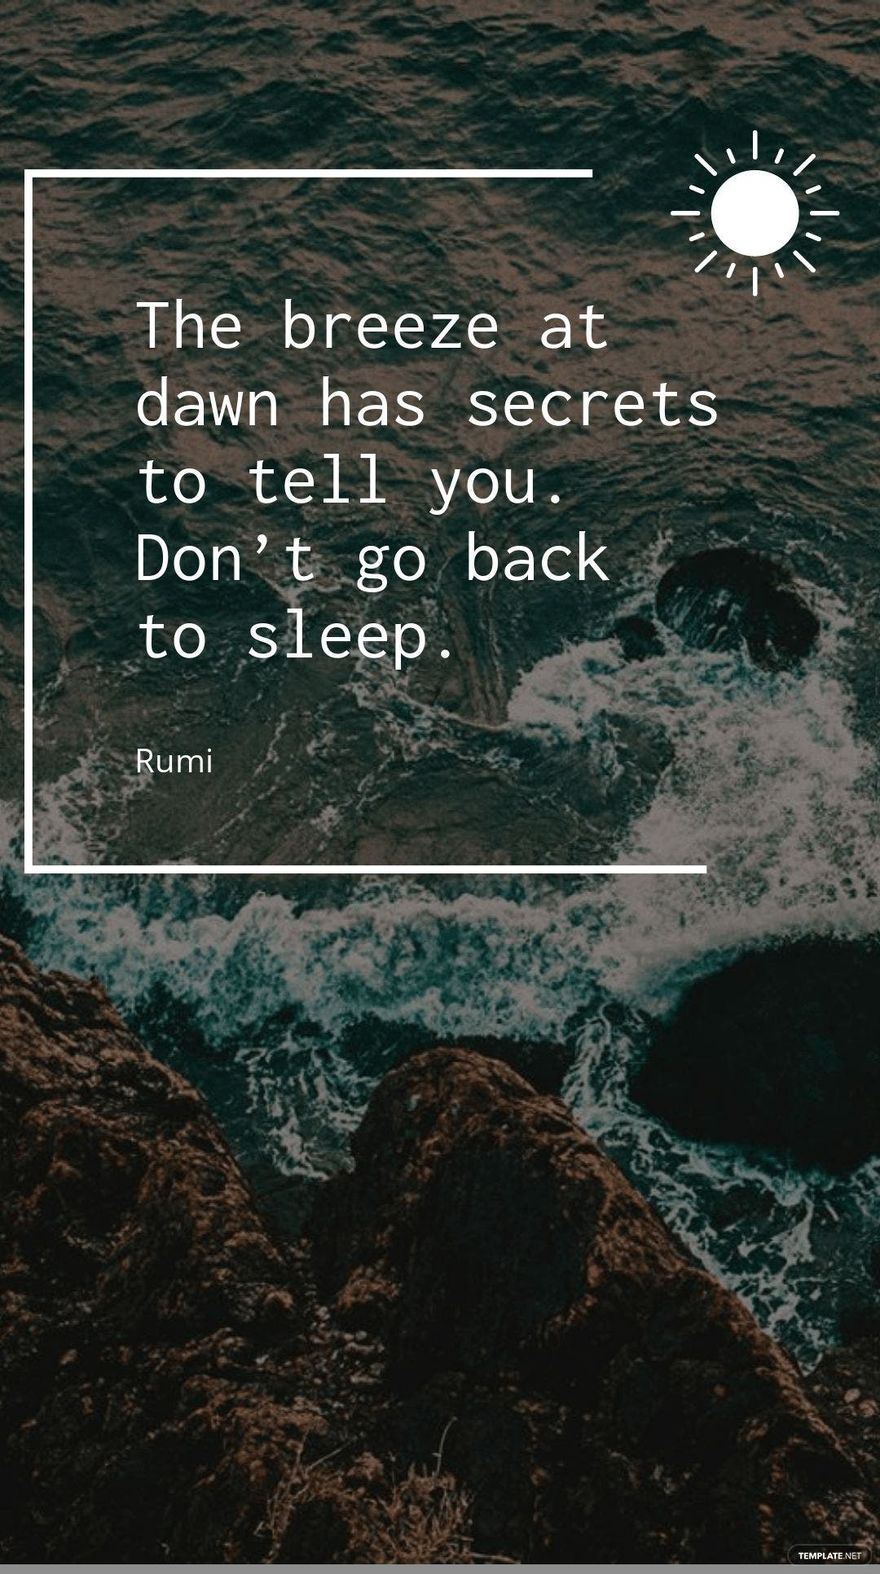 Rumi - The breeze at dawn has secrets to tell you. Don’t go back to sleep.